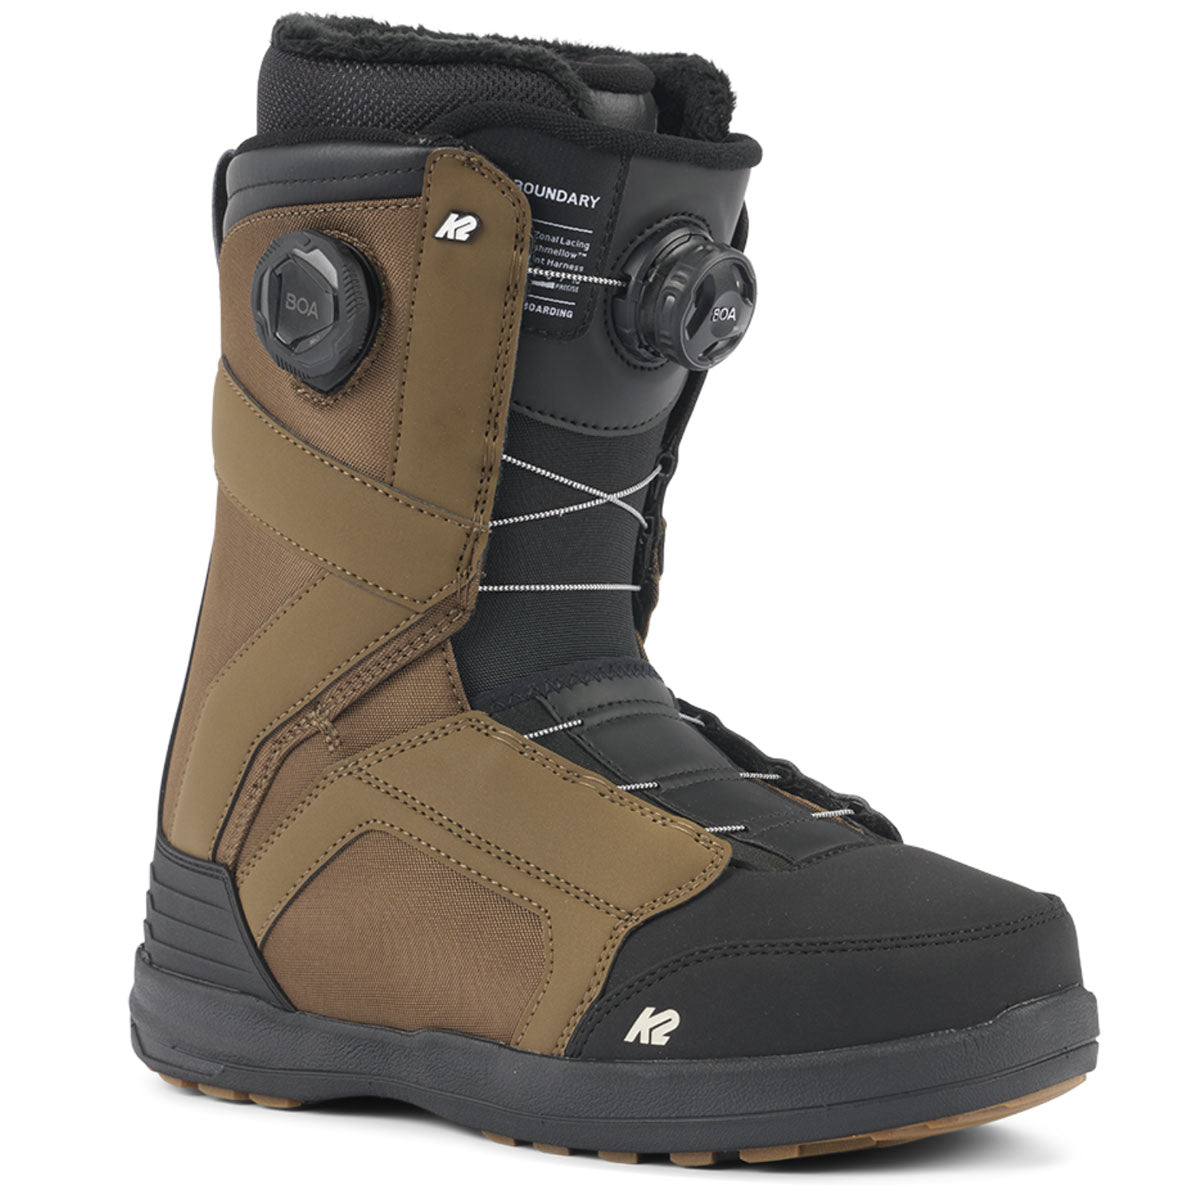 K2 Boundary 2024 Snowboard Boots - Brown image 1